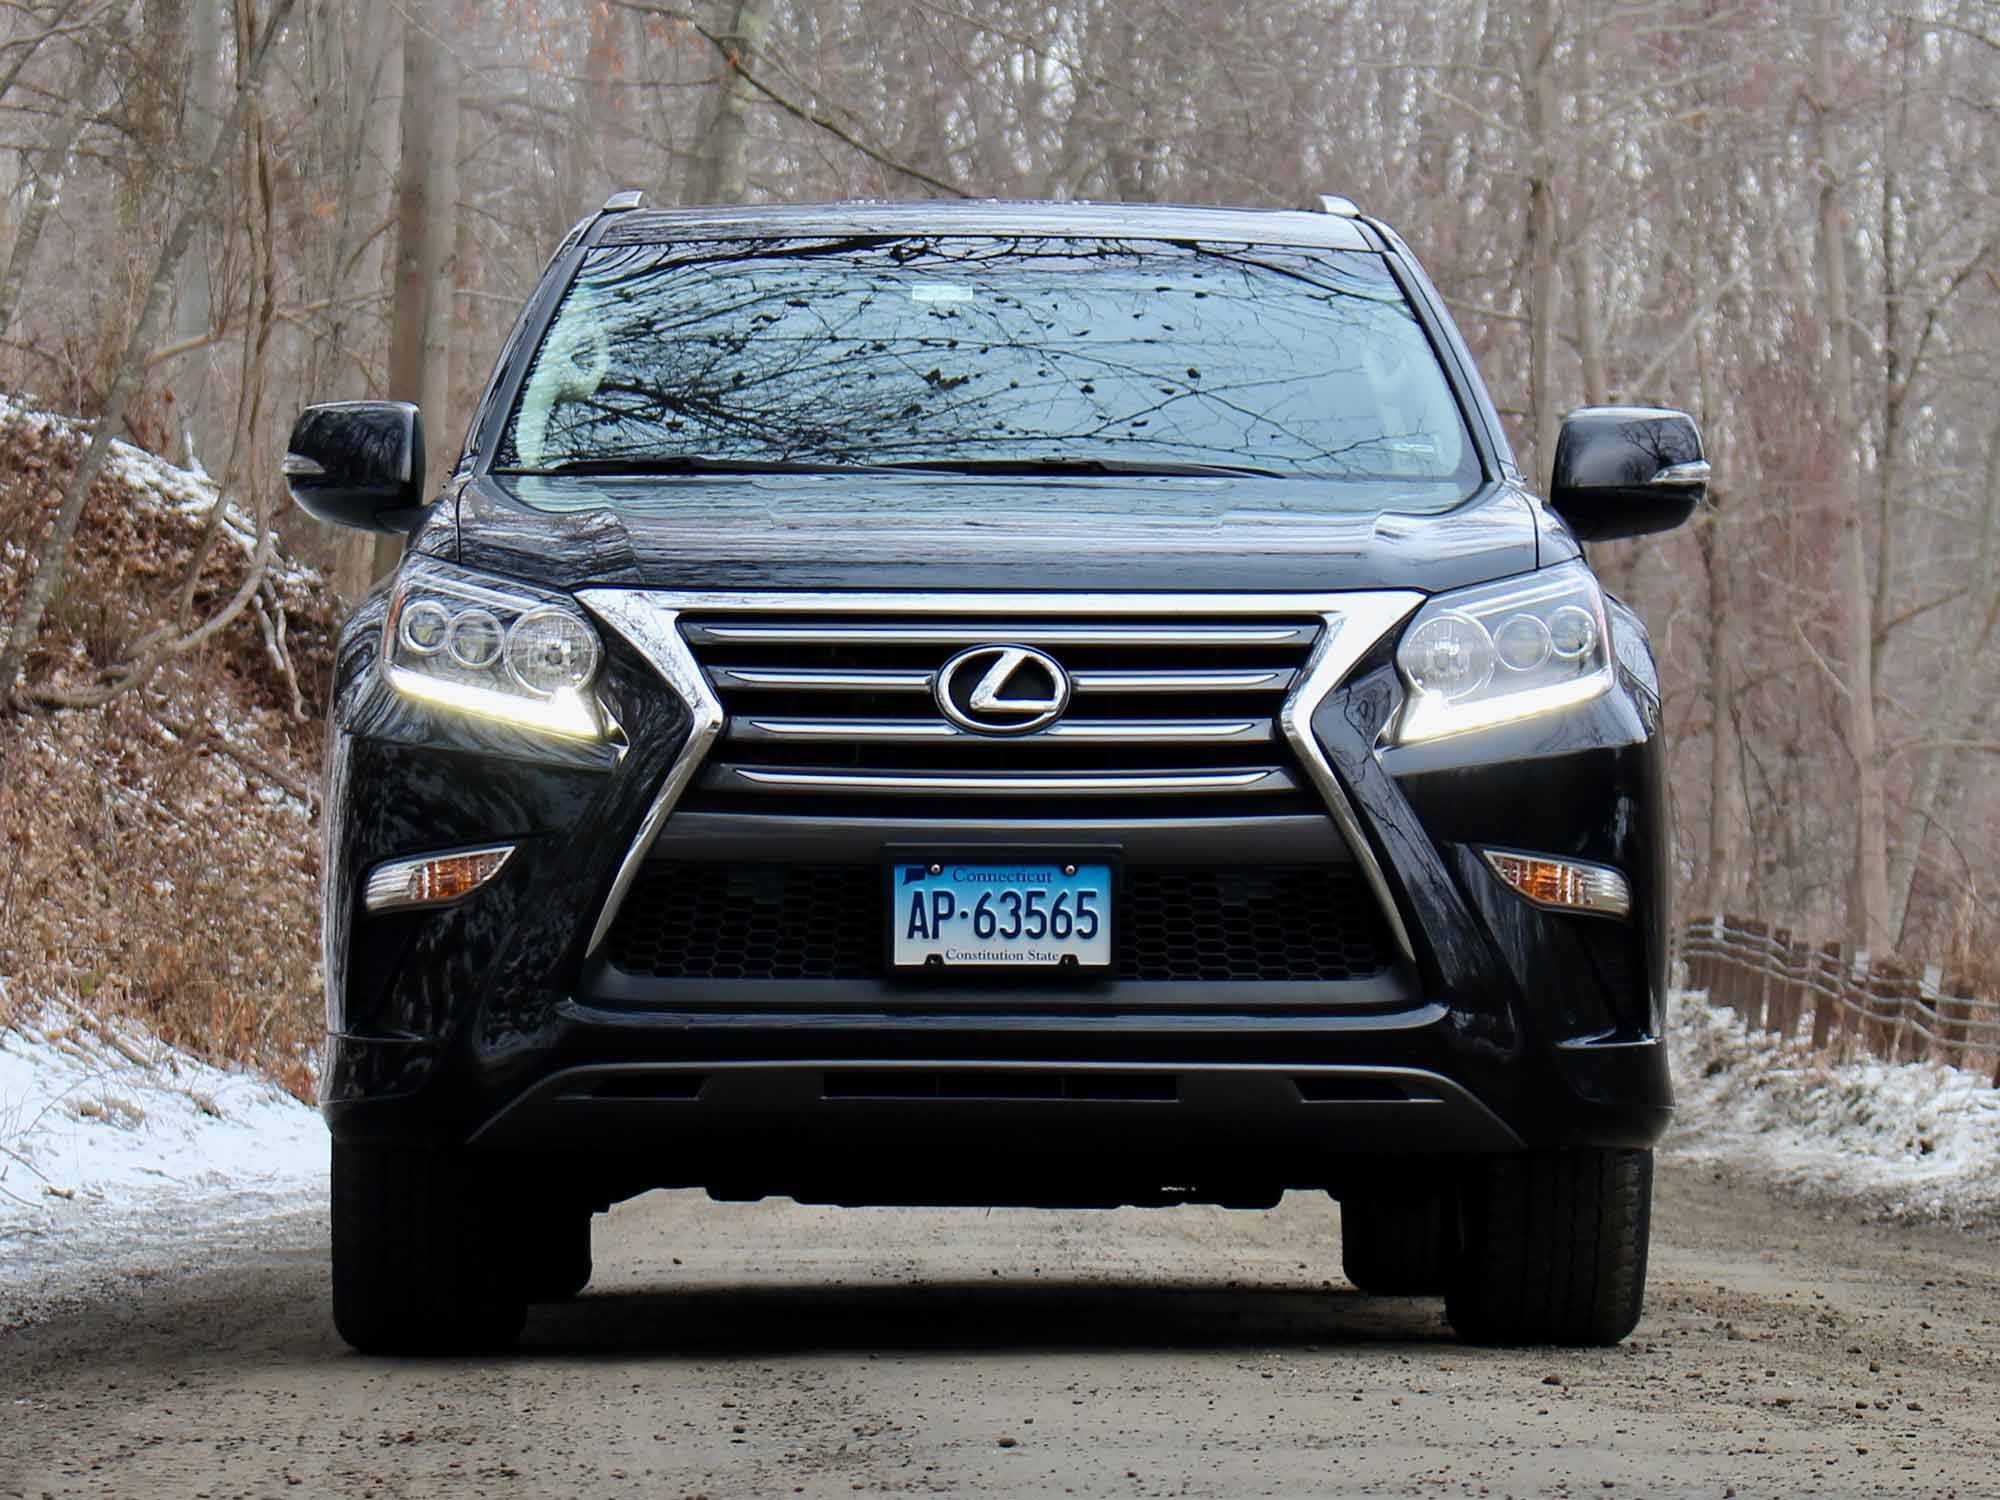 Our new-to-us 2018 Lexus GX 460.